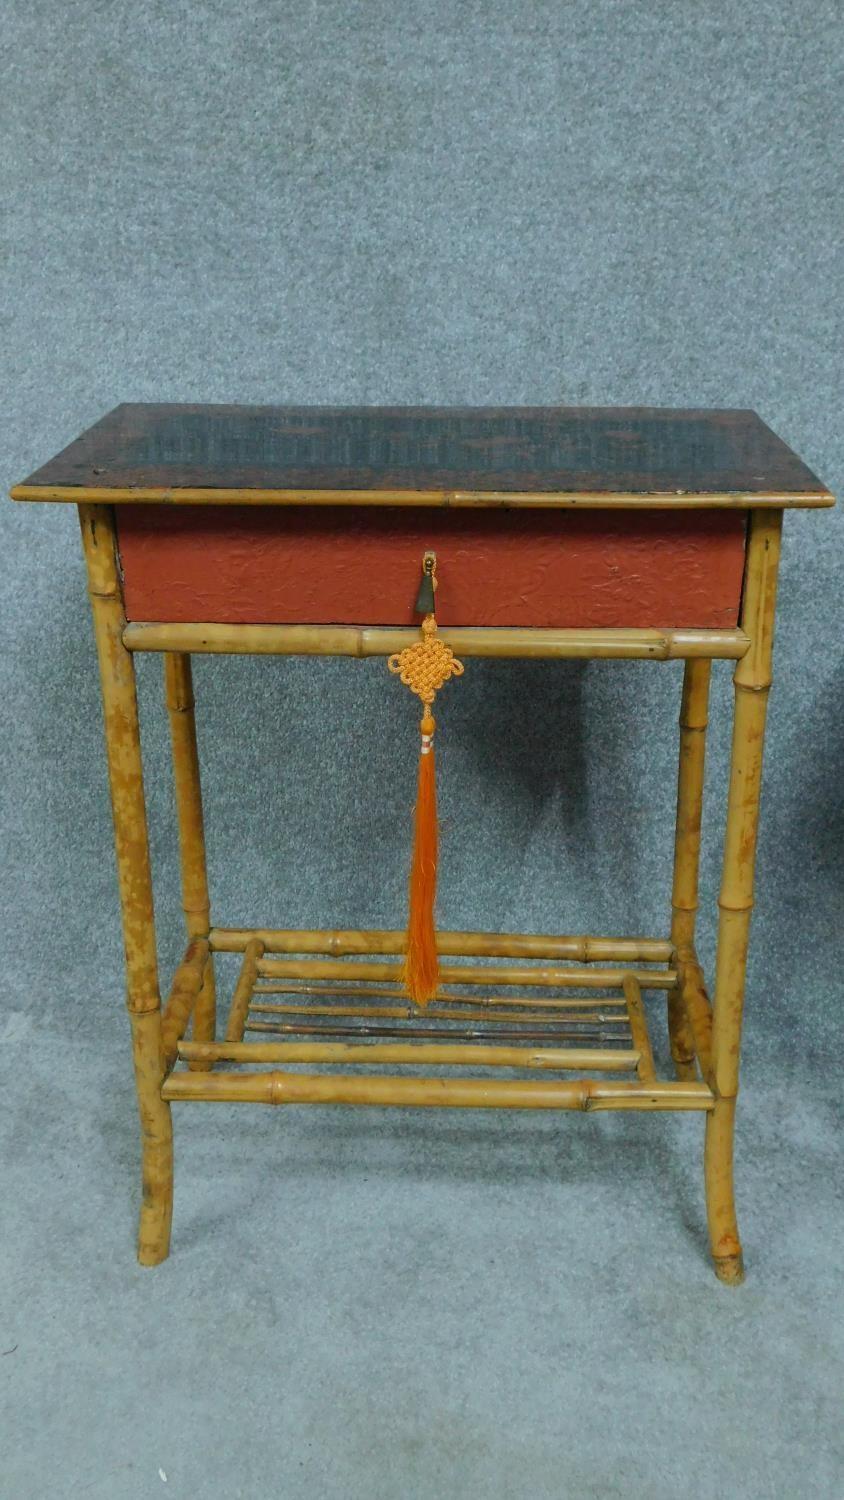 A late 19th century bamboo bedside table with floral red and black lacquered top and one drawer - Image 3 of 6